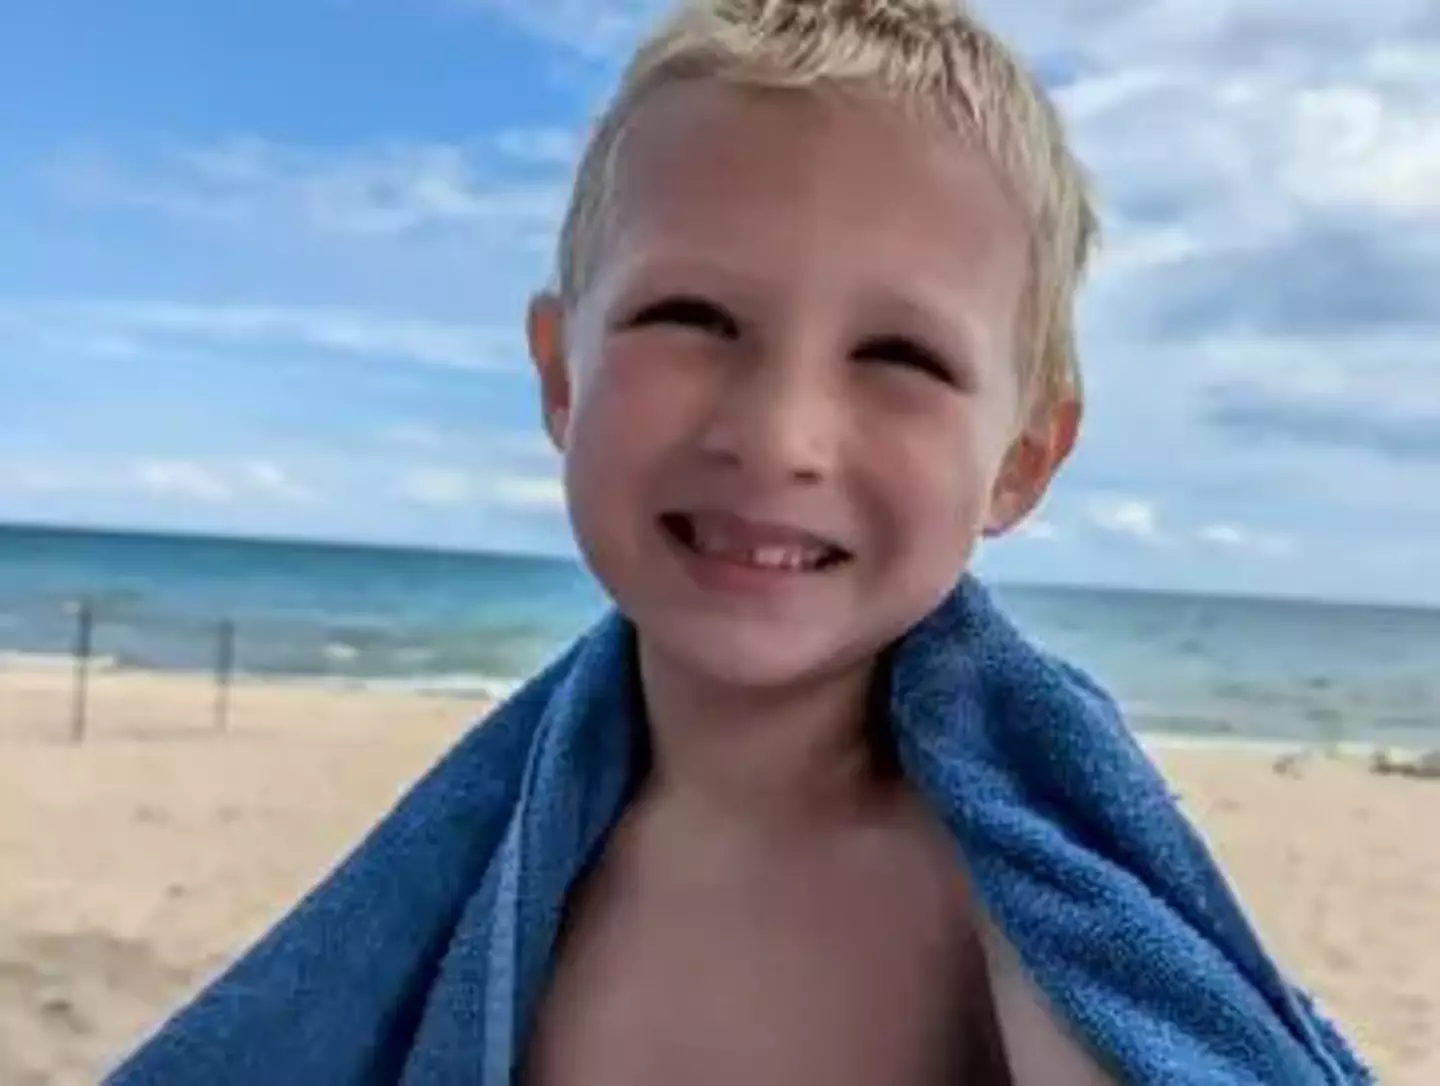 Griffin Emerson was rescued from the pool after around one minute under water.